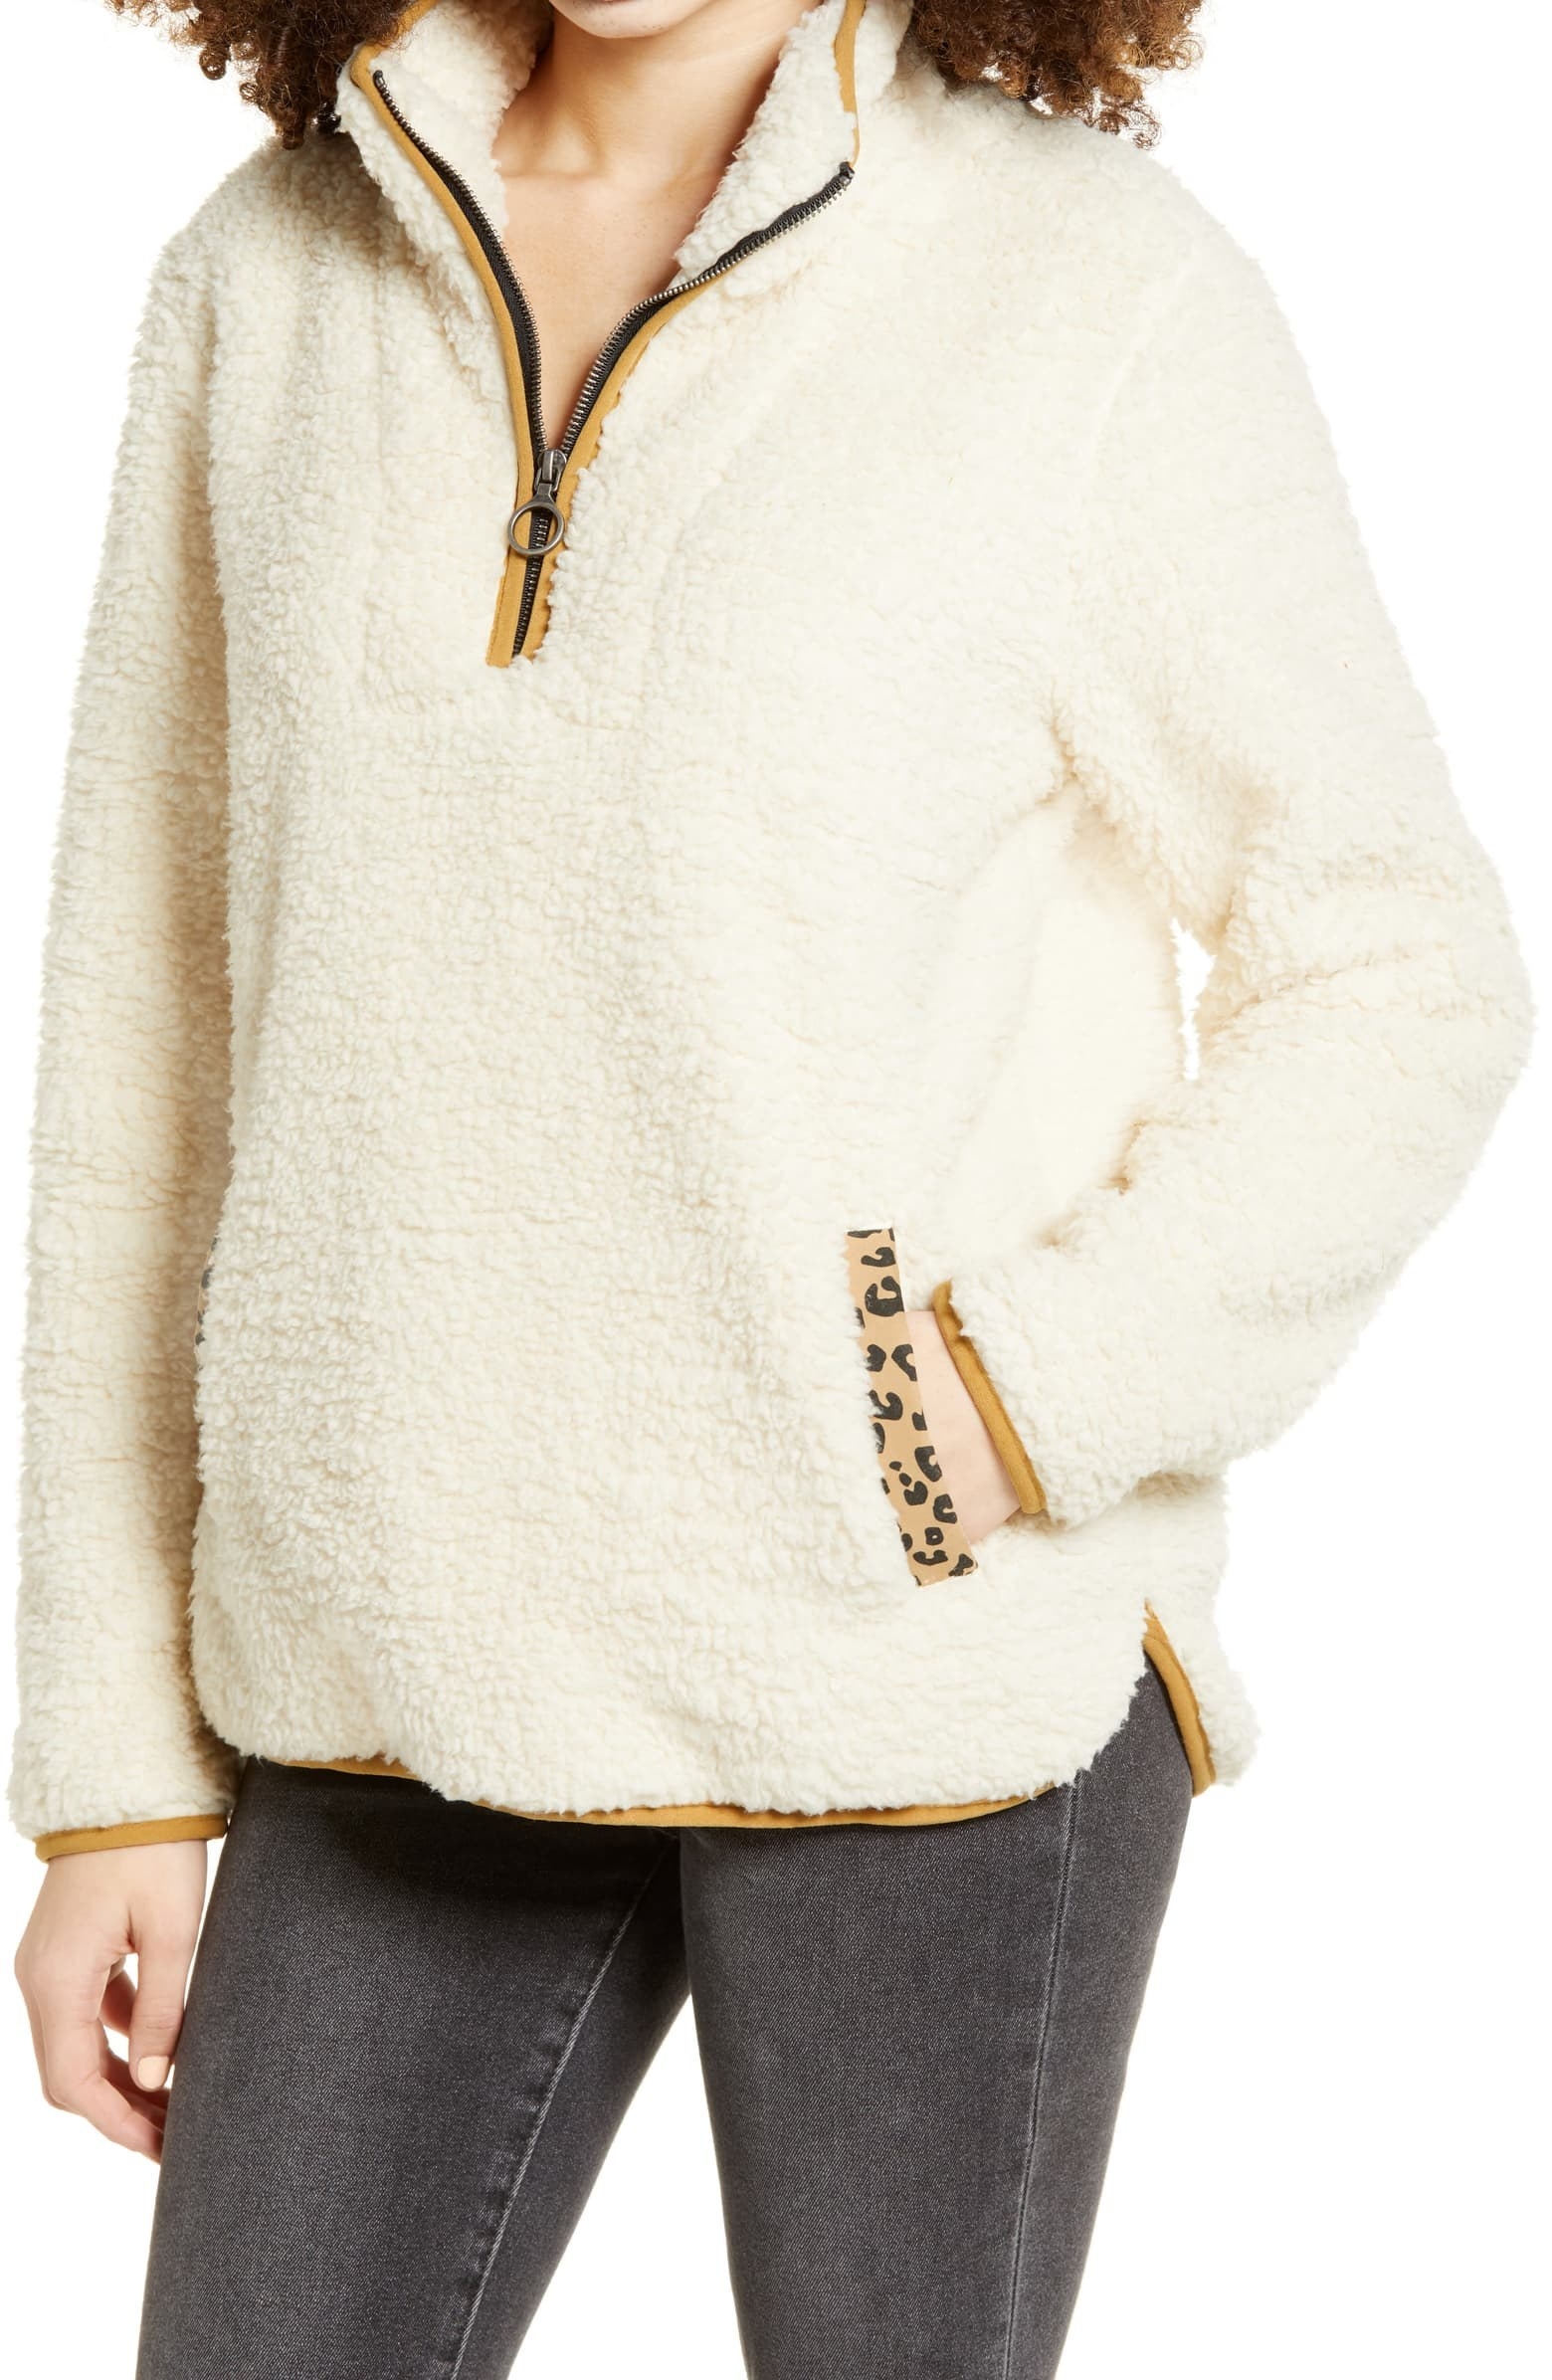 a model in an off-white fuzzy half-zip with cheetah print accents on the pocket